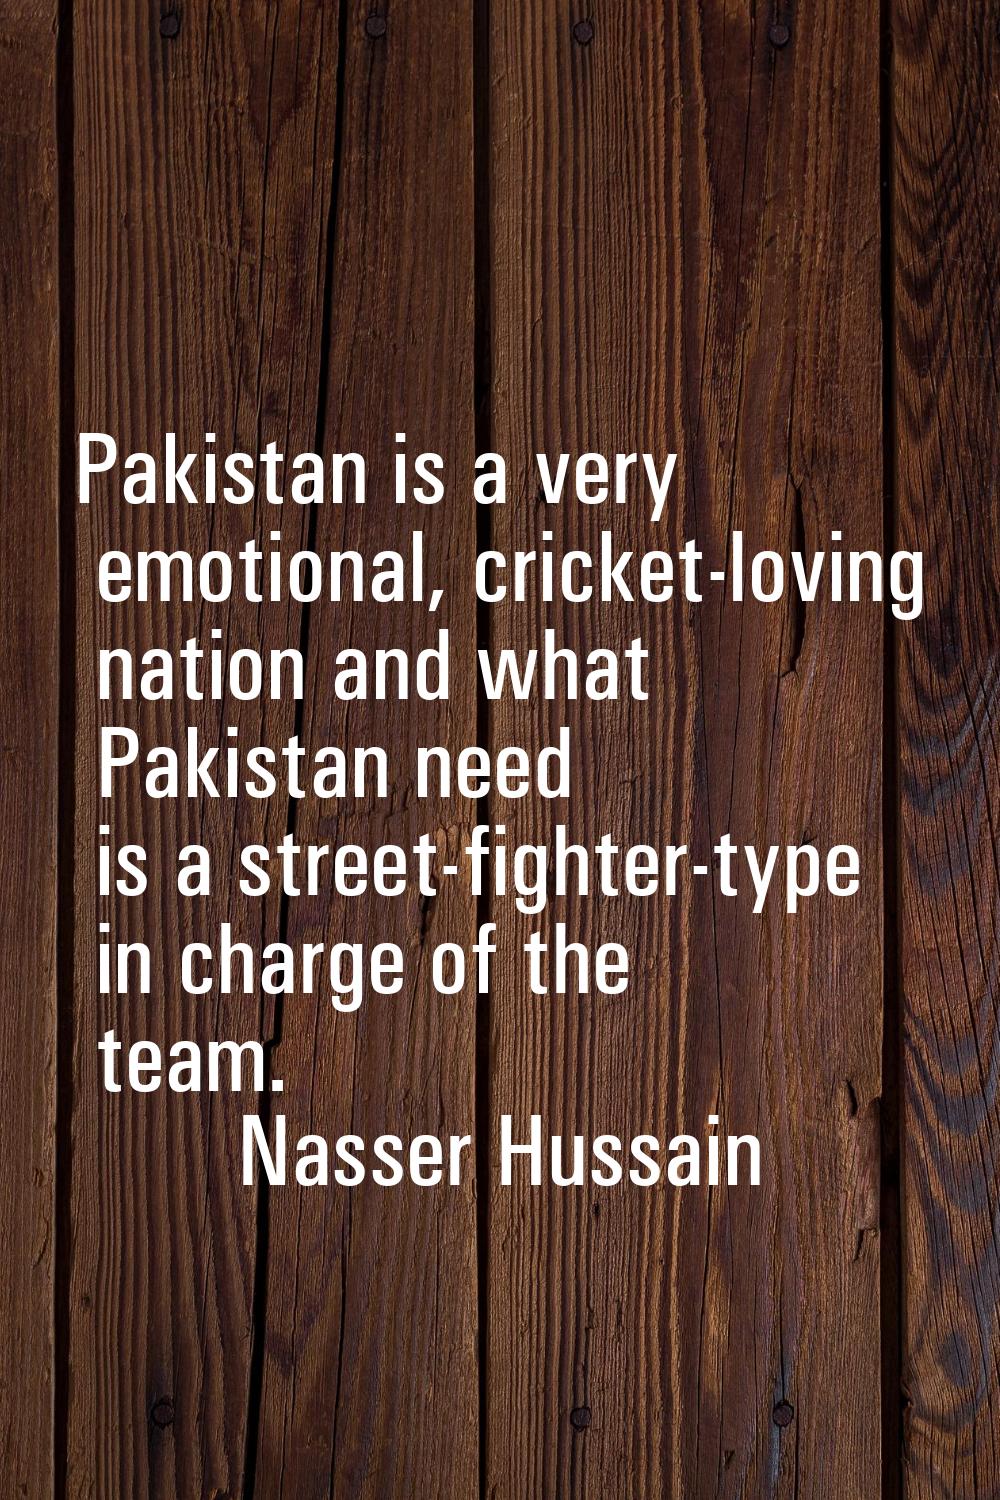 Pakistan is a very emotional, cricket-loving nation and what Pakistan need is a street-fighter-type